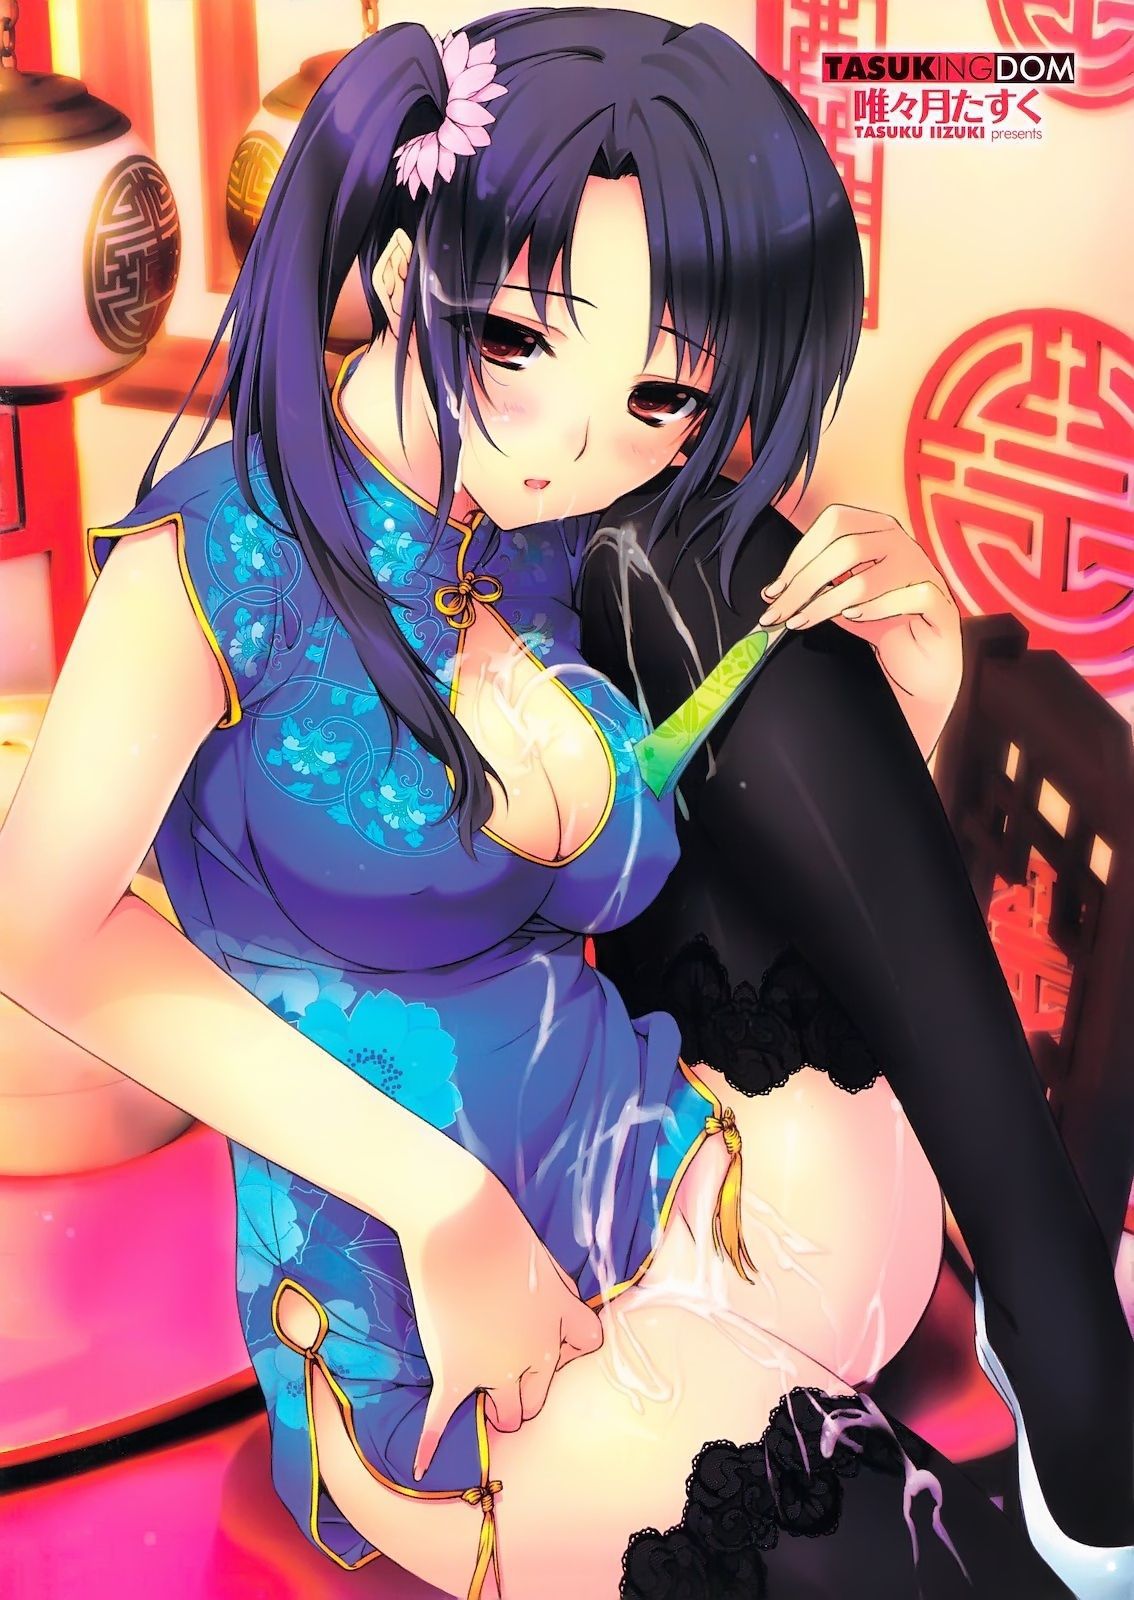 [Secondary-ZIP: take a picture of a pretty girl wearing a cheongsam! 10